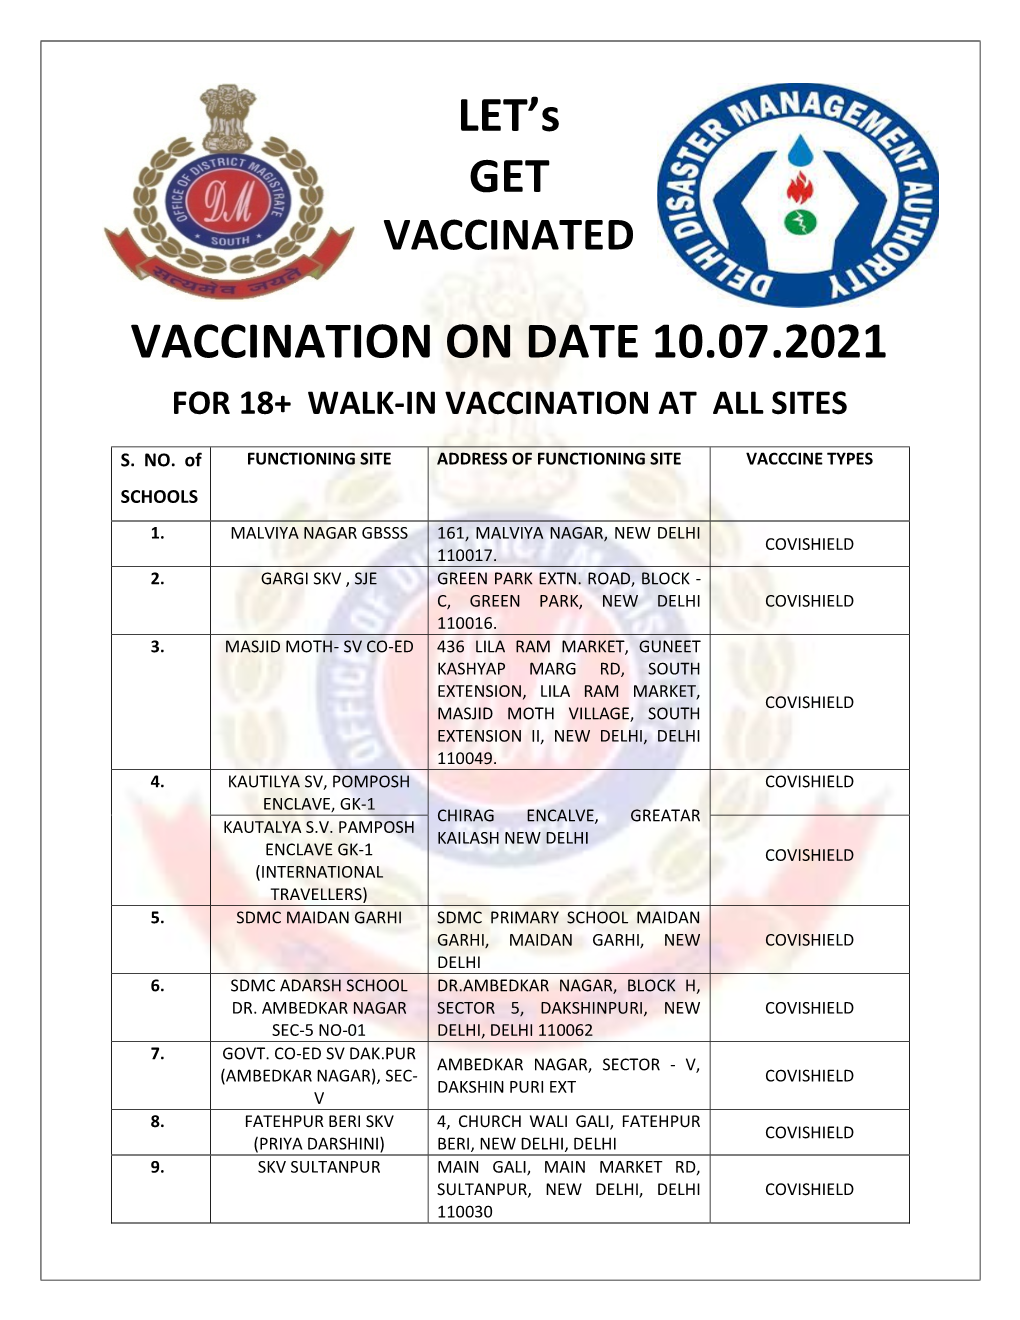 Vaccination on Date 10.07.2021 for 18+ Walk-In Vaccination at All Sites